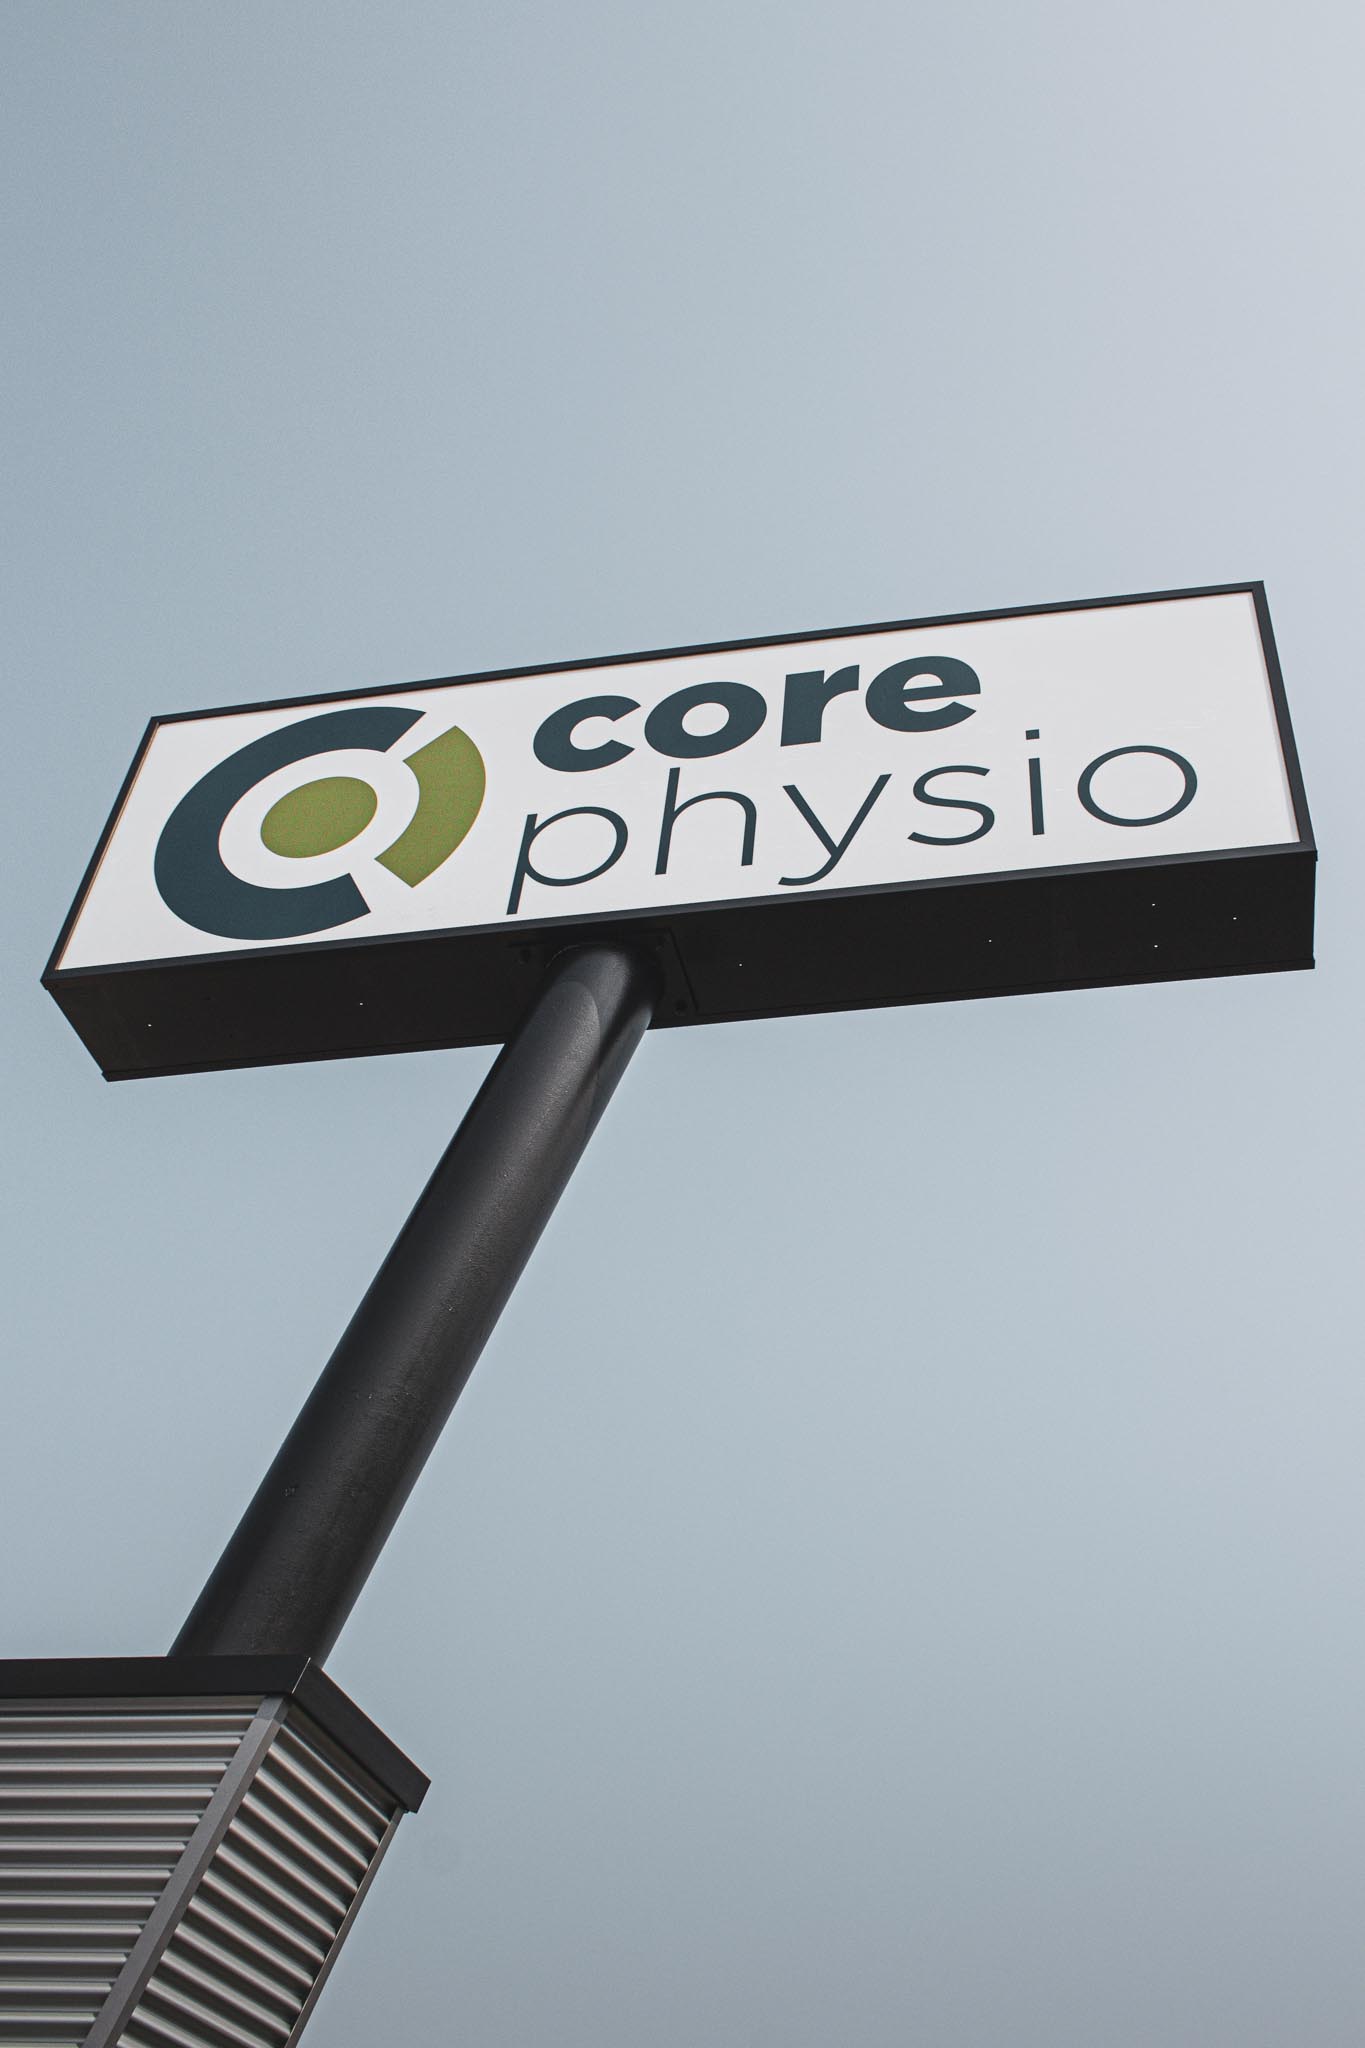 healthcare-core-physio-pylon-sign-worms-eye-view